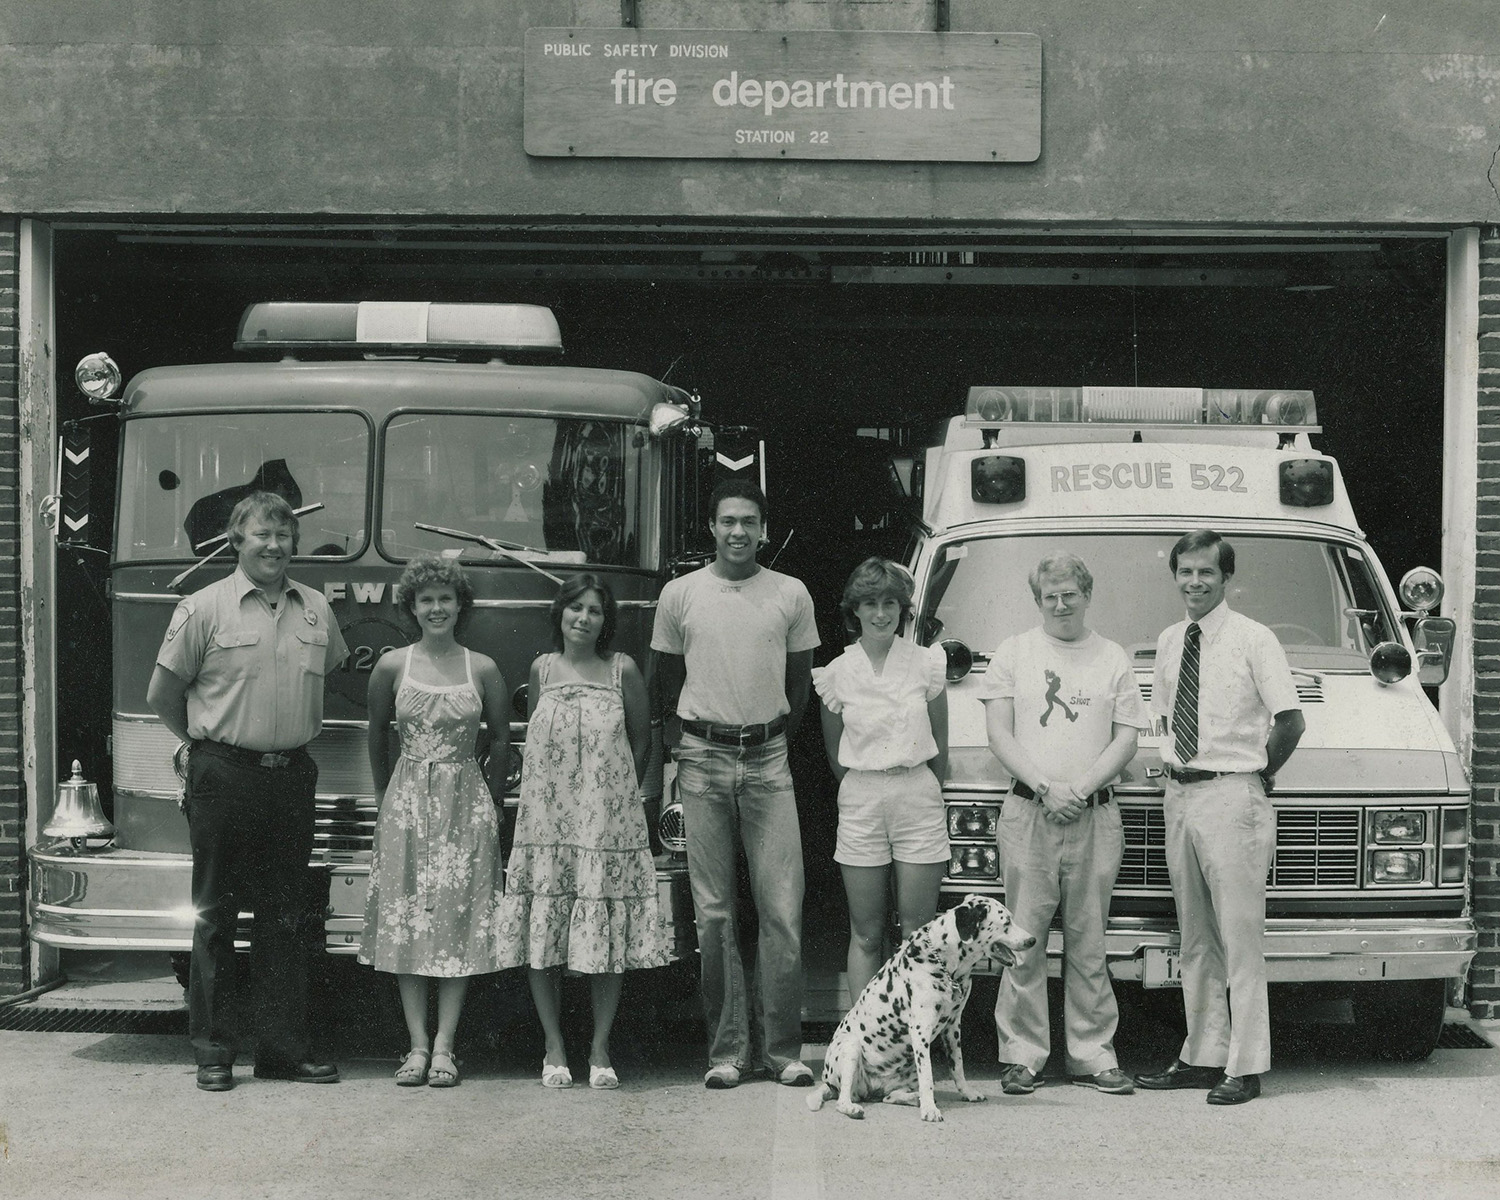 July 14 1982, Cpt. R. Palmer, Mollie Robinson, Norah Harmon, Bob Hopson, Priscilla White, Kraig Bailey, D.P. Bliss, and Freckles pose in front of the fire department building